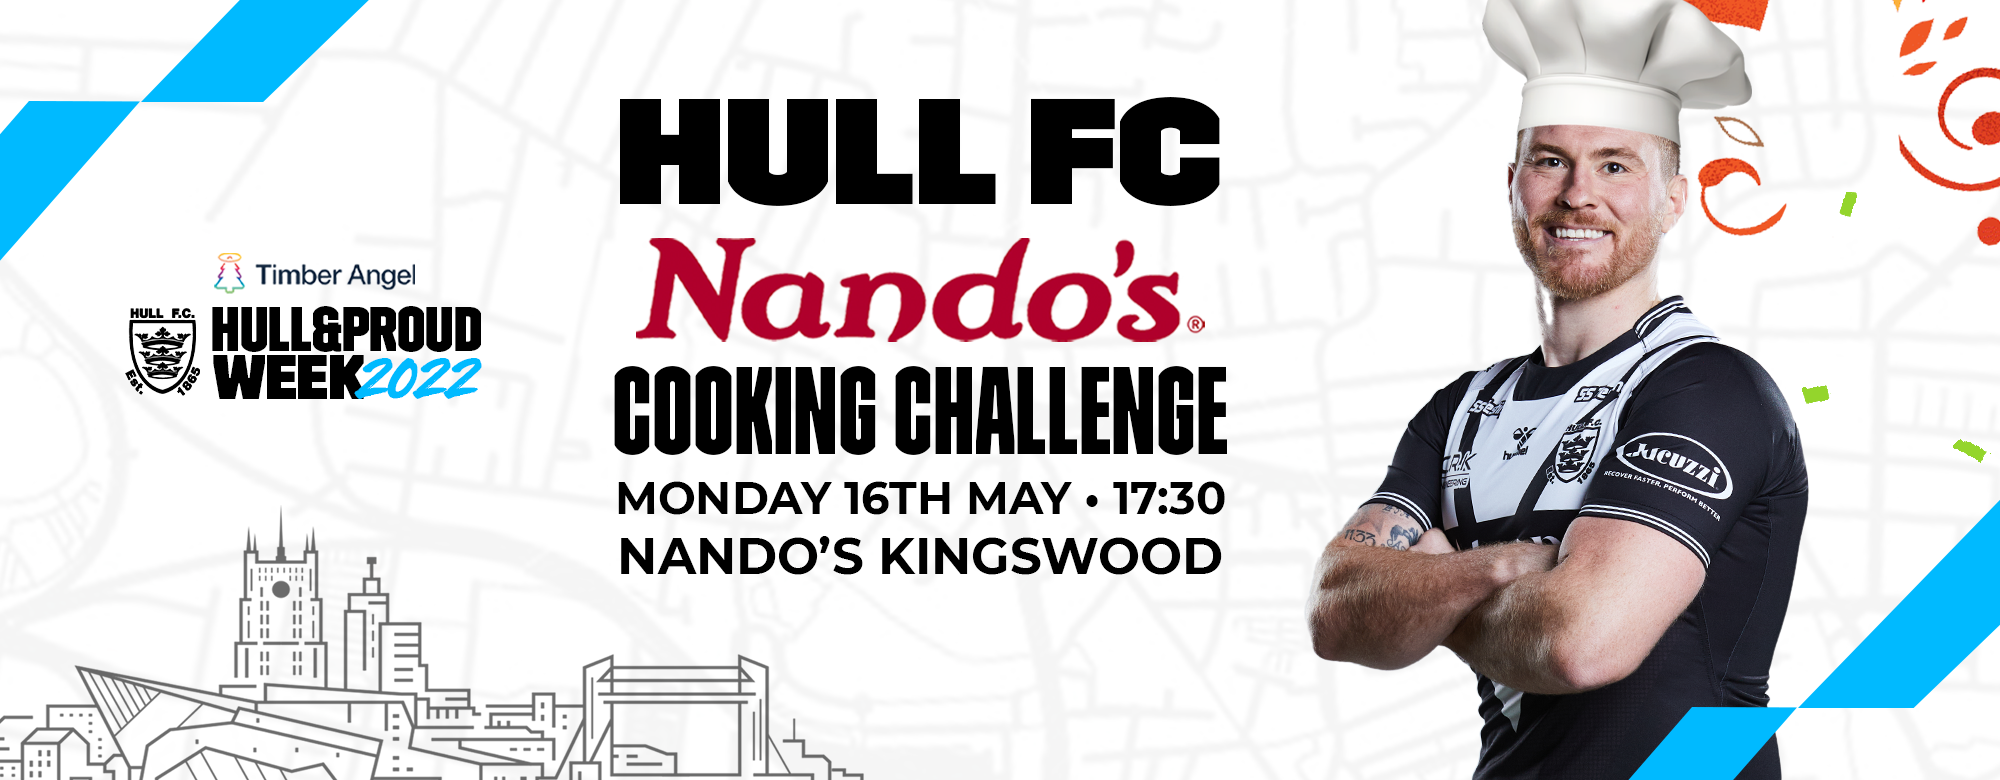 Hull&Proud Week: Players Cooking Challenge Heads To Nando’s!